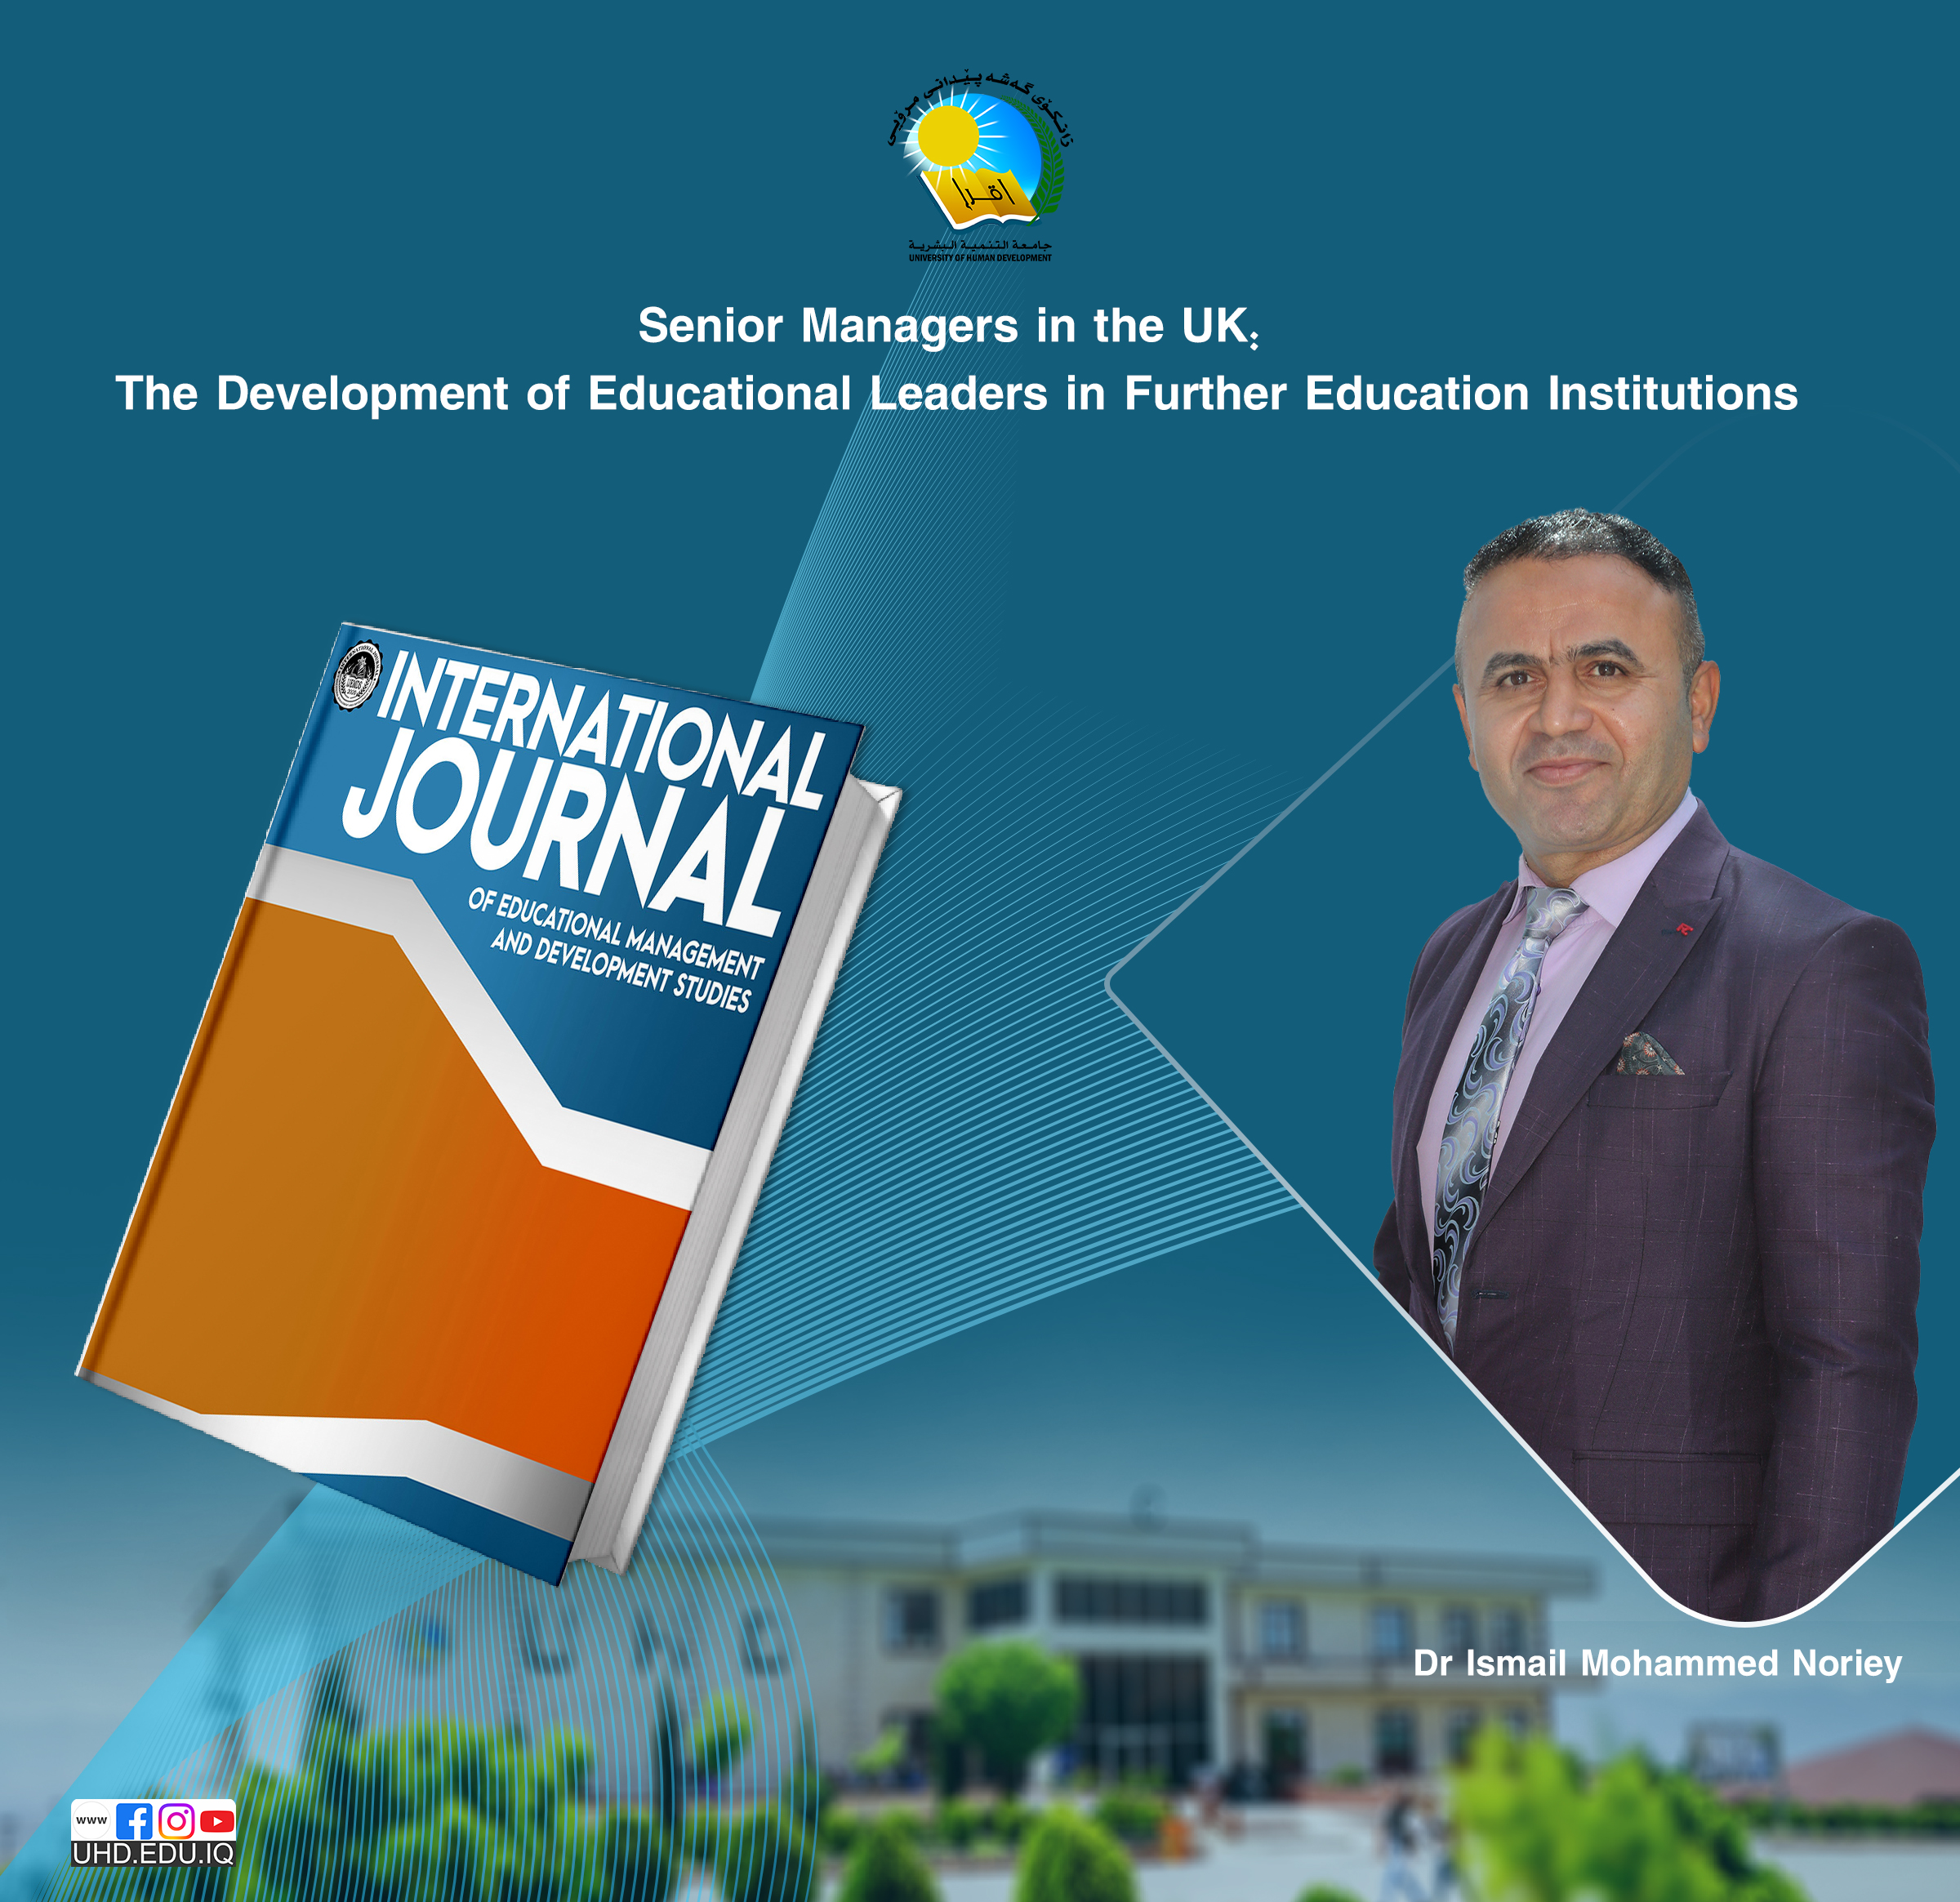 Dr Noriey published a research paper on the development of educational leaders